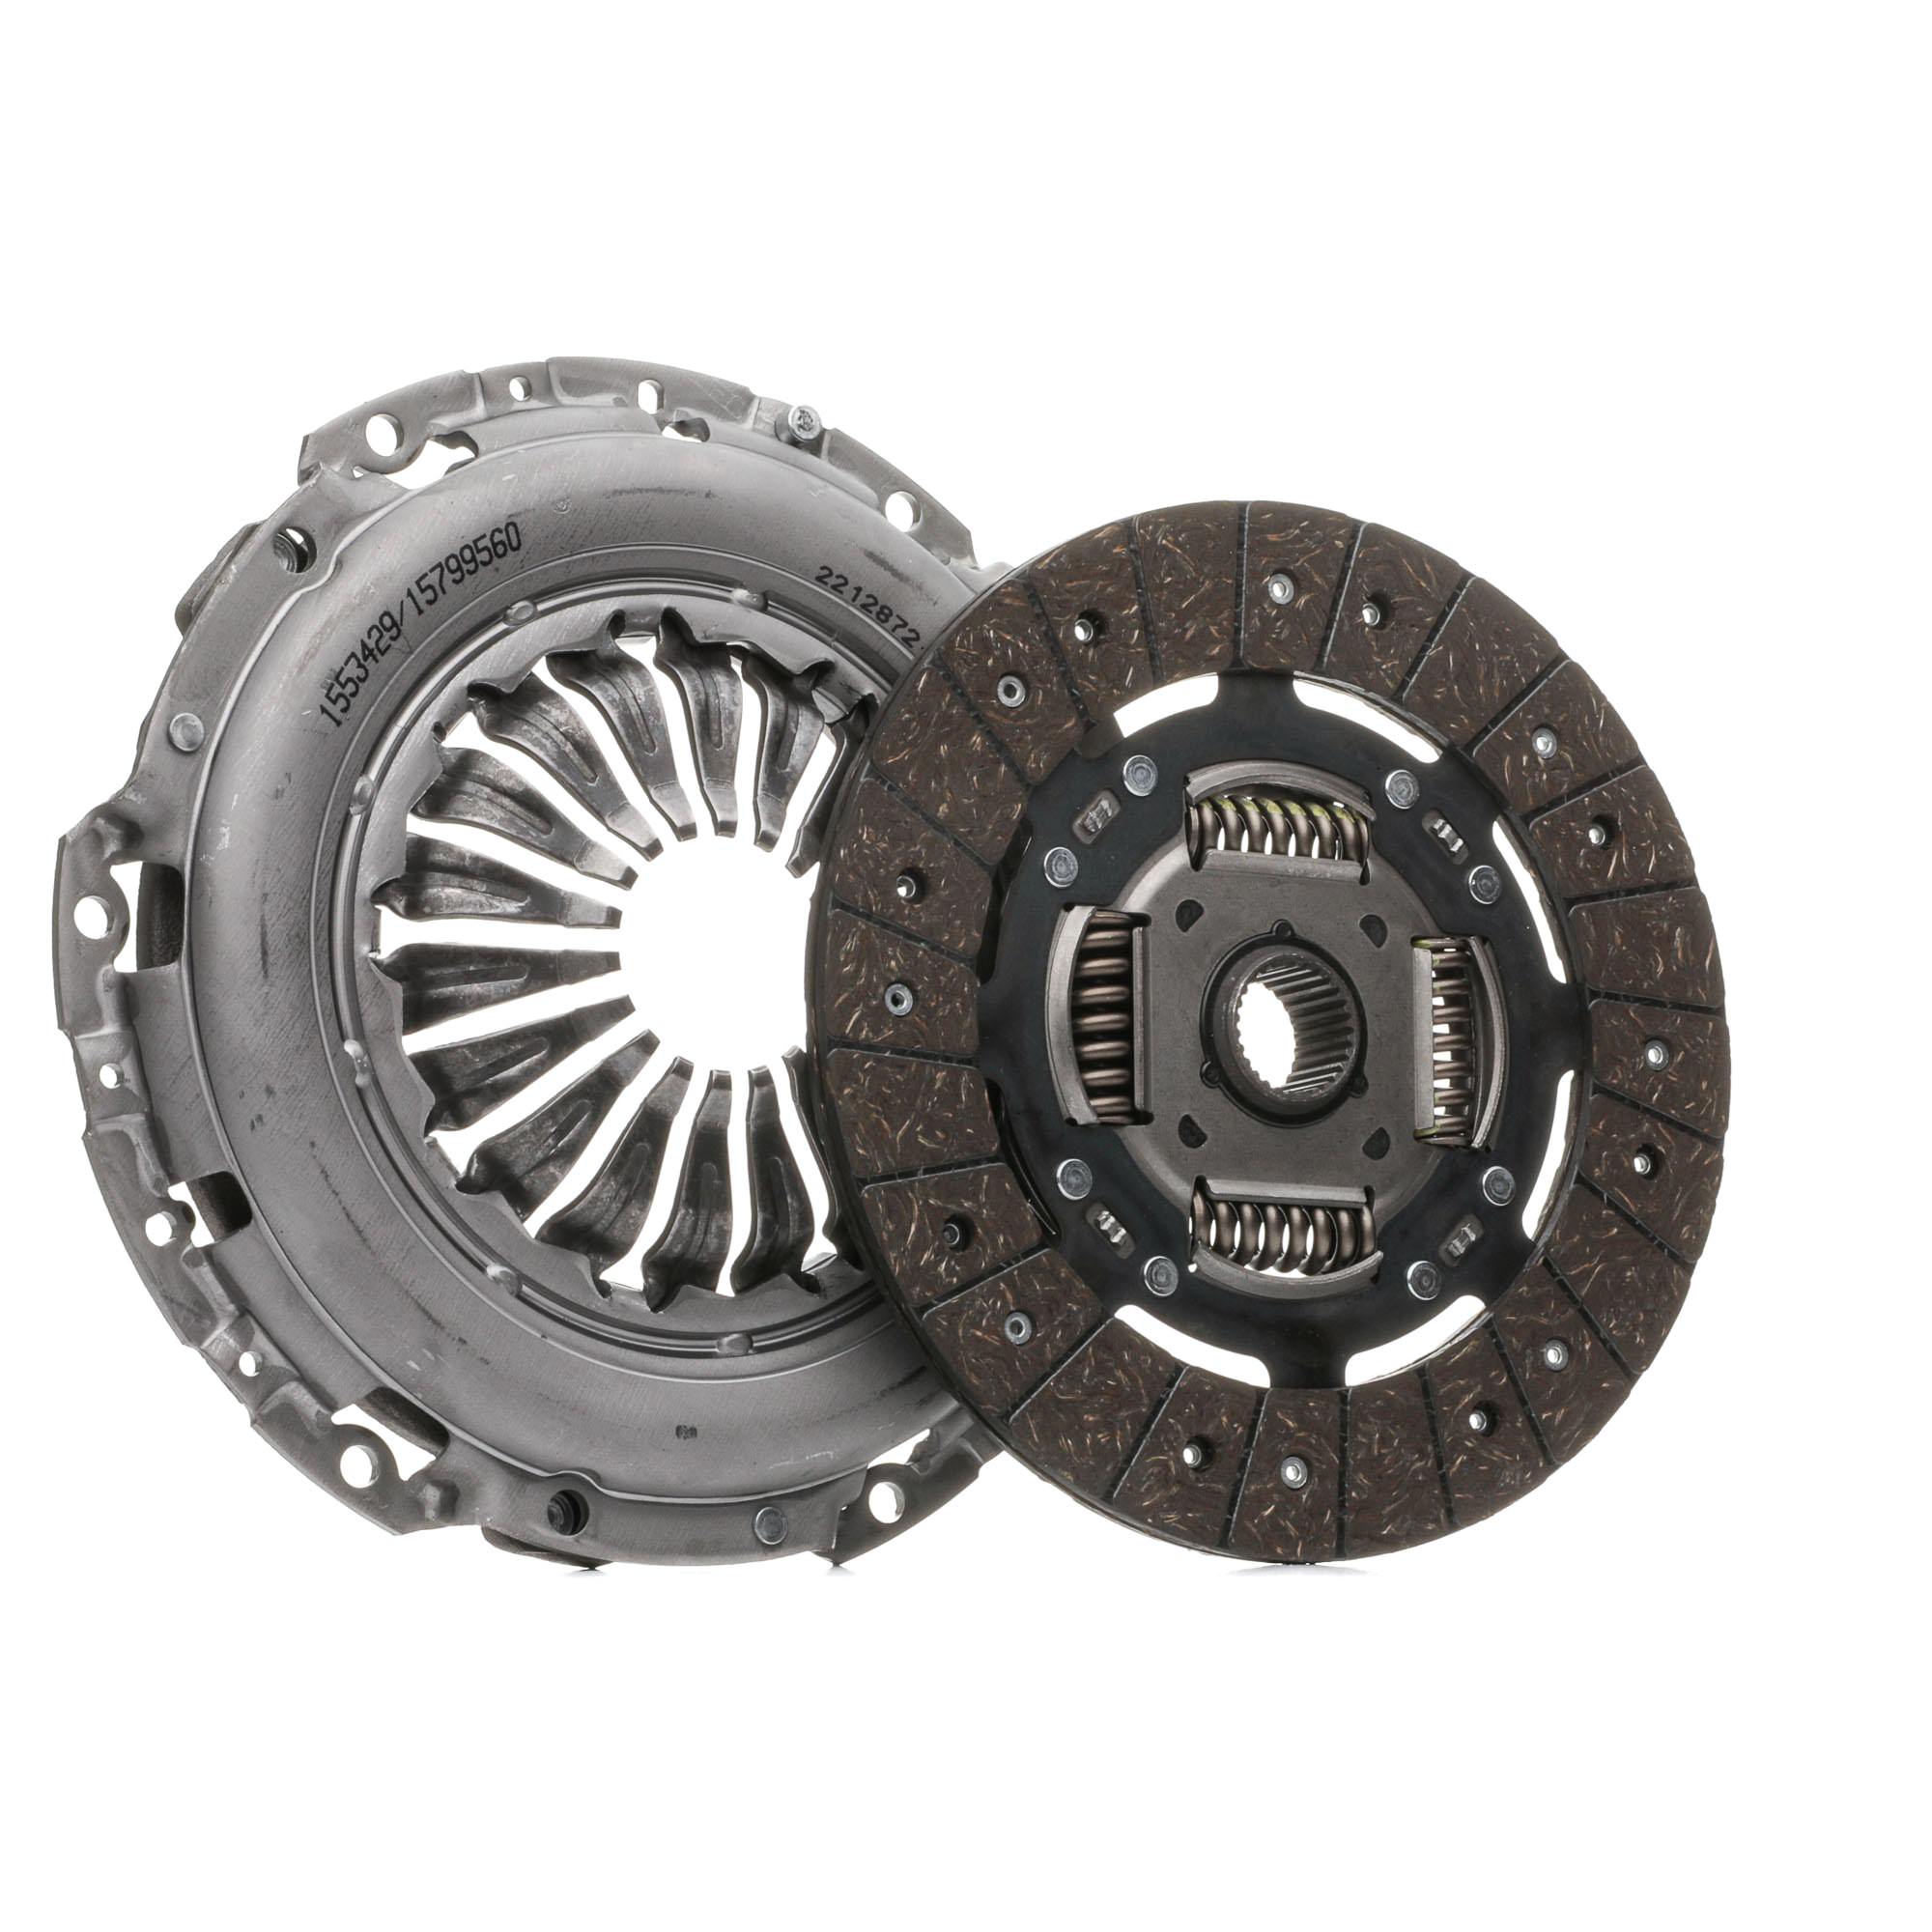 RIDEX 479C2986 Clutch kit for engines with dual-mass flywheel, with mounting tool, with guide sleeve, with screw set, Requires special tools for mounting, Check and replace dual-mass flywheel if necessary., with automatic adjustment, 240mm